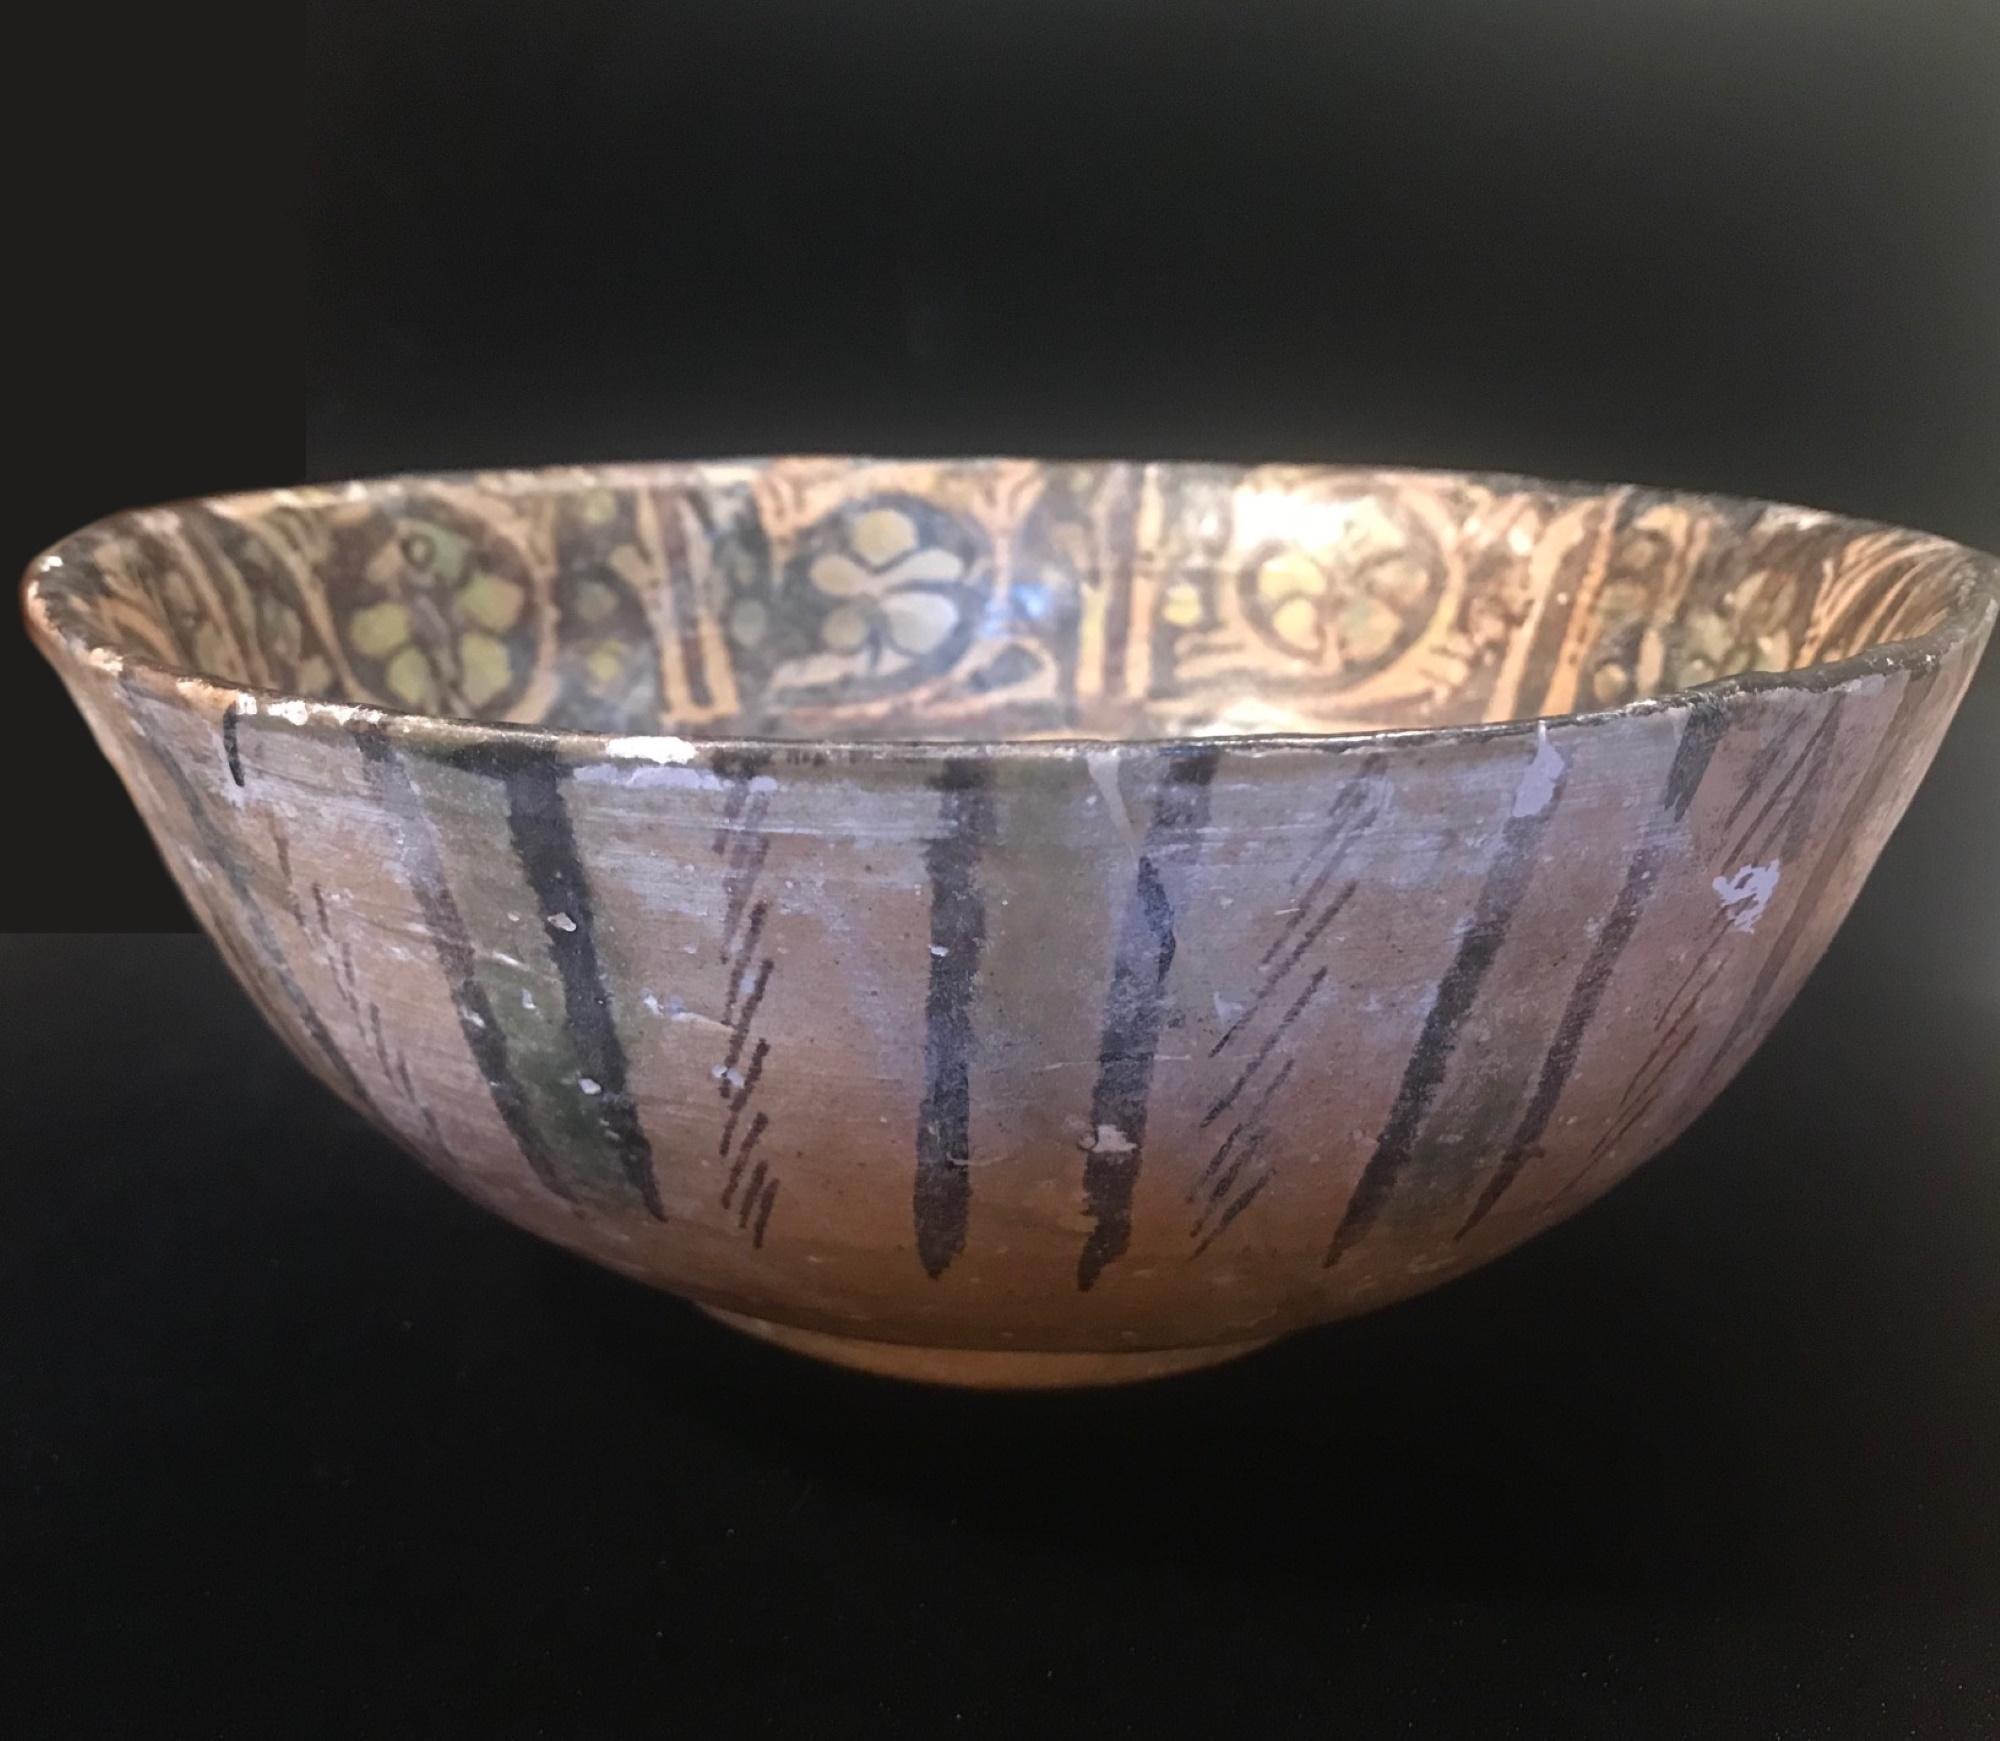 Ancient Persian Rare Kashan bowl 13th century Islamic Pottery Art.

This beautifully decorated and well cared for bowl is one of the few examples still in existence. It was made in Kashan, Persia in the 13th century, Seljuk- Atabeg period. Kashan